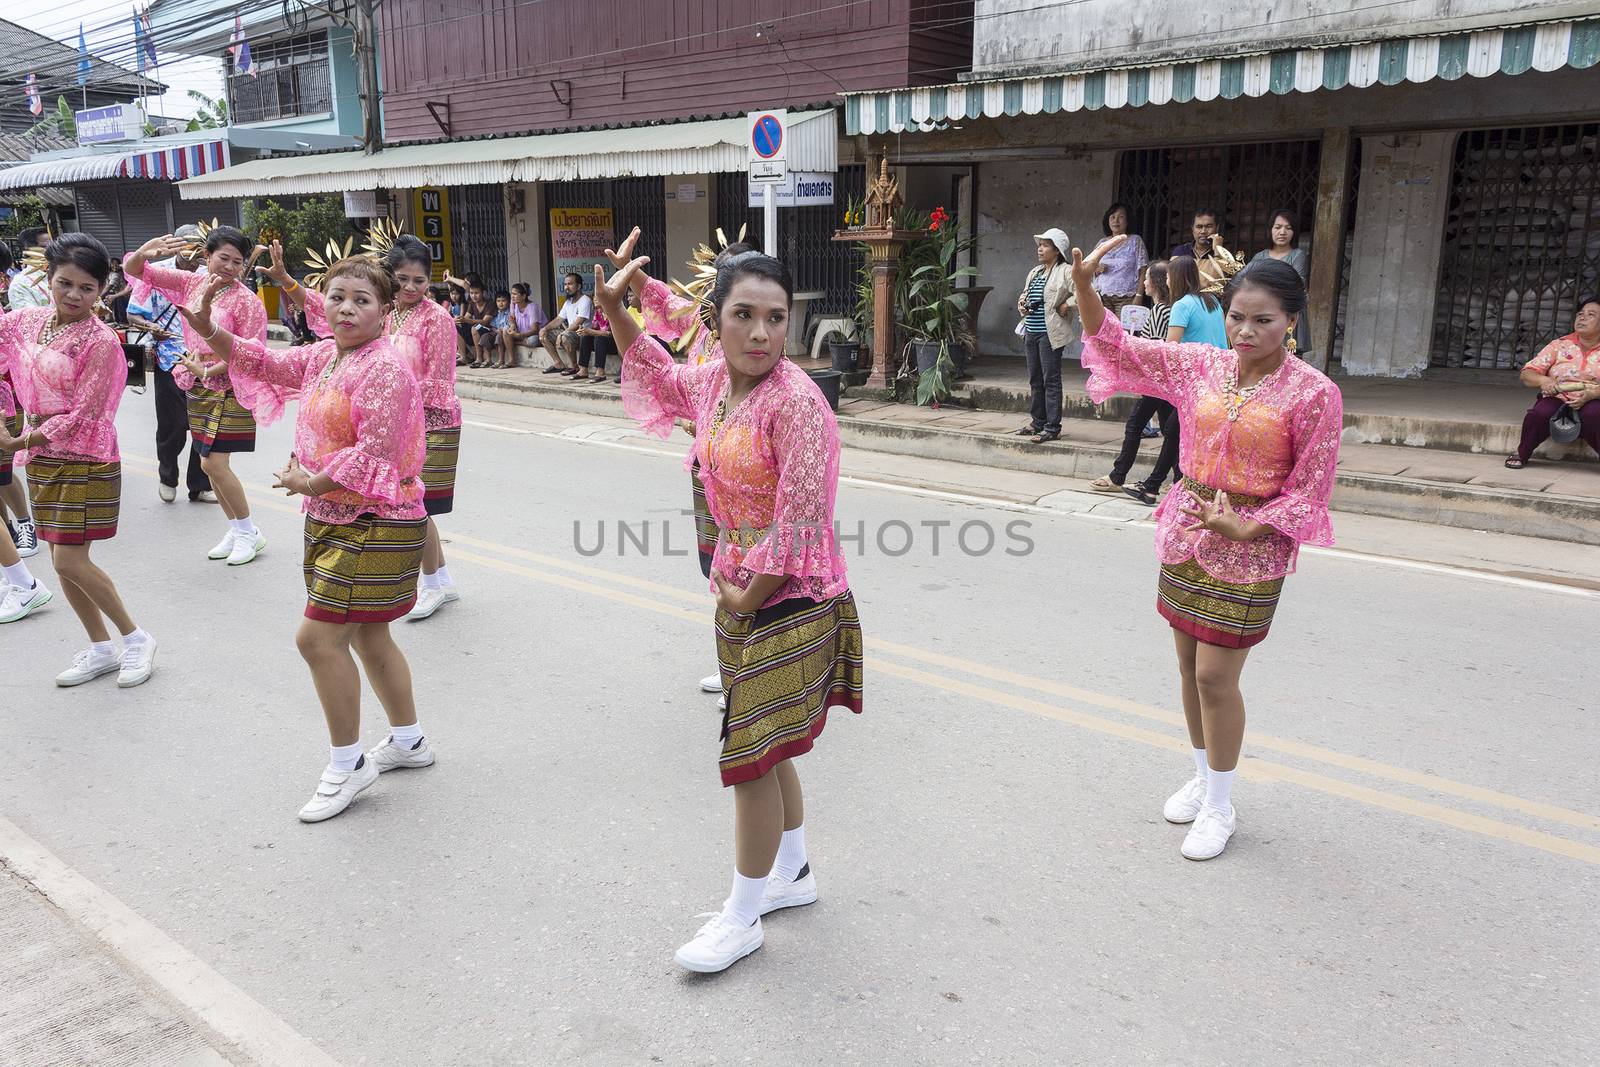 THAILAND - OCTOBER 20: Unidentified people participated in "Ngan Chak Pra", a traditional buddhist festival on October 20, 2013 in Chaiya,Suratthani, Thailand.